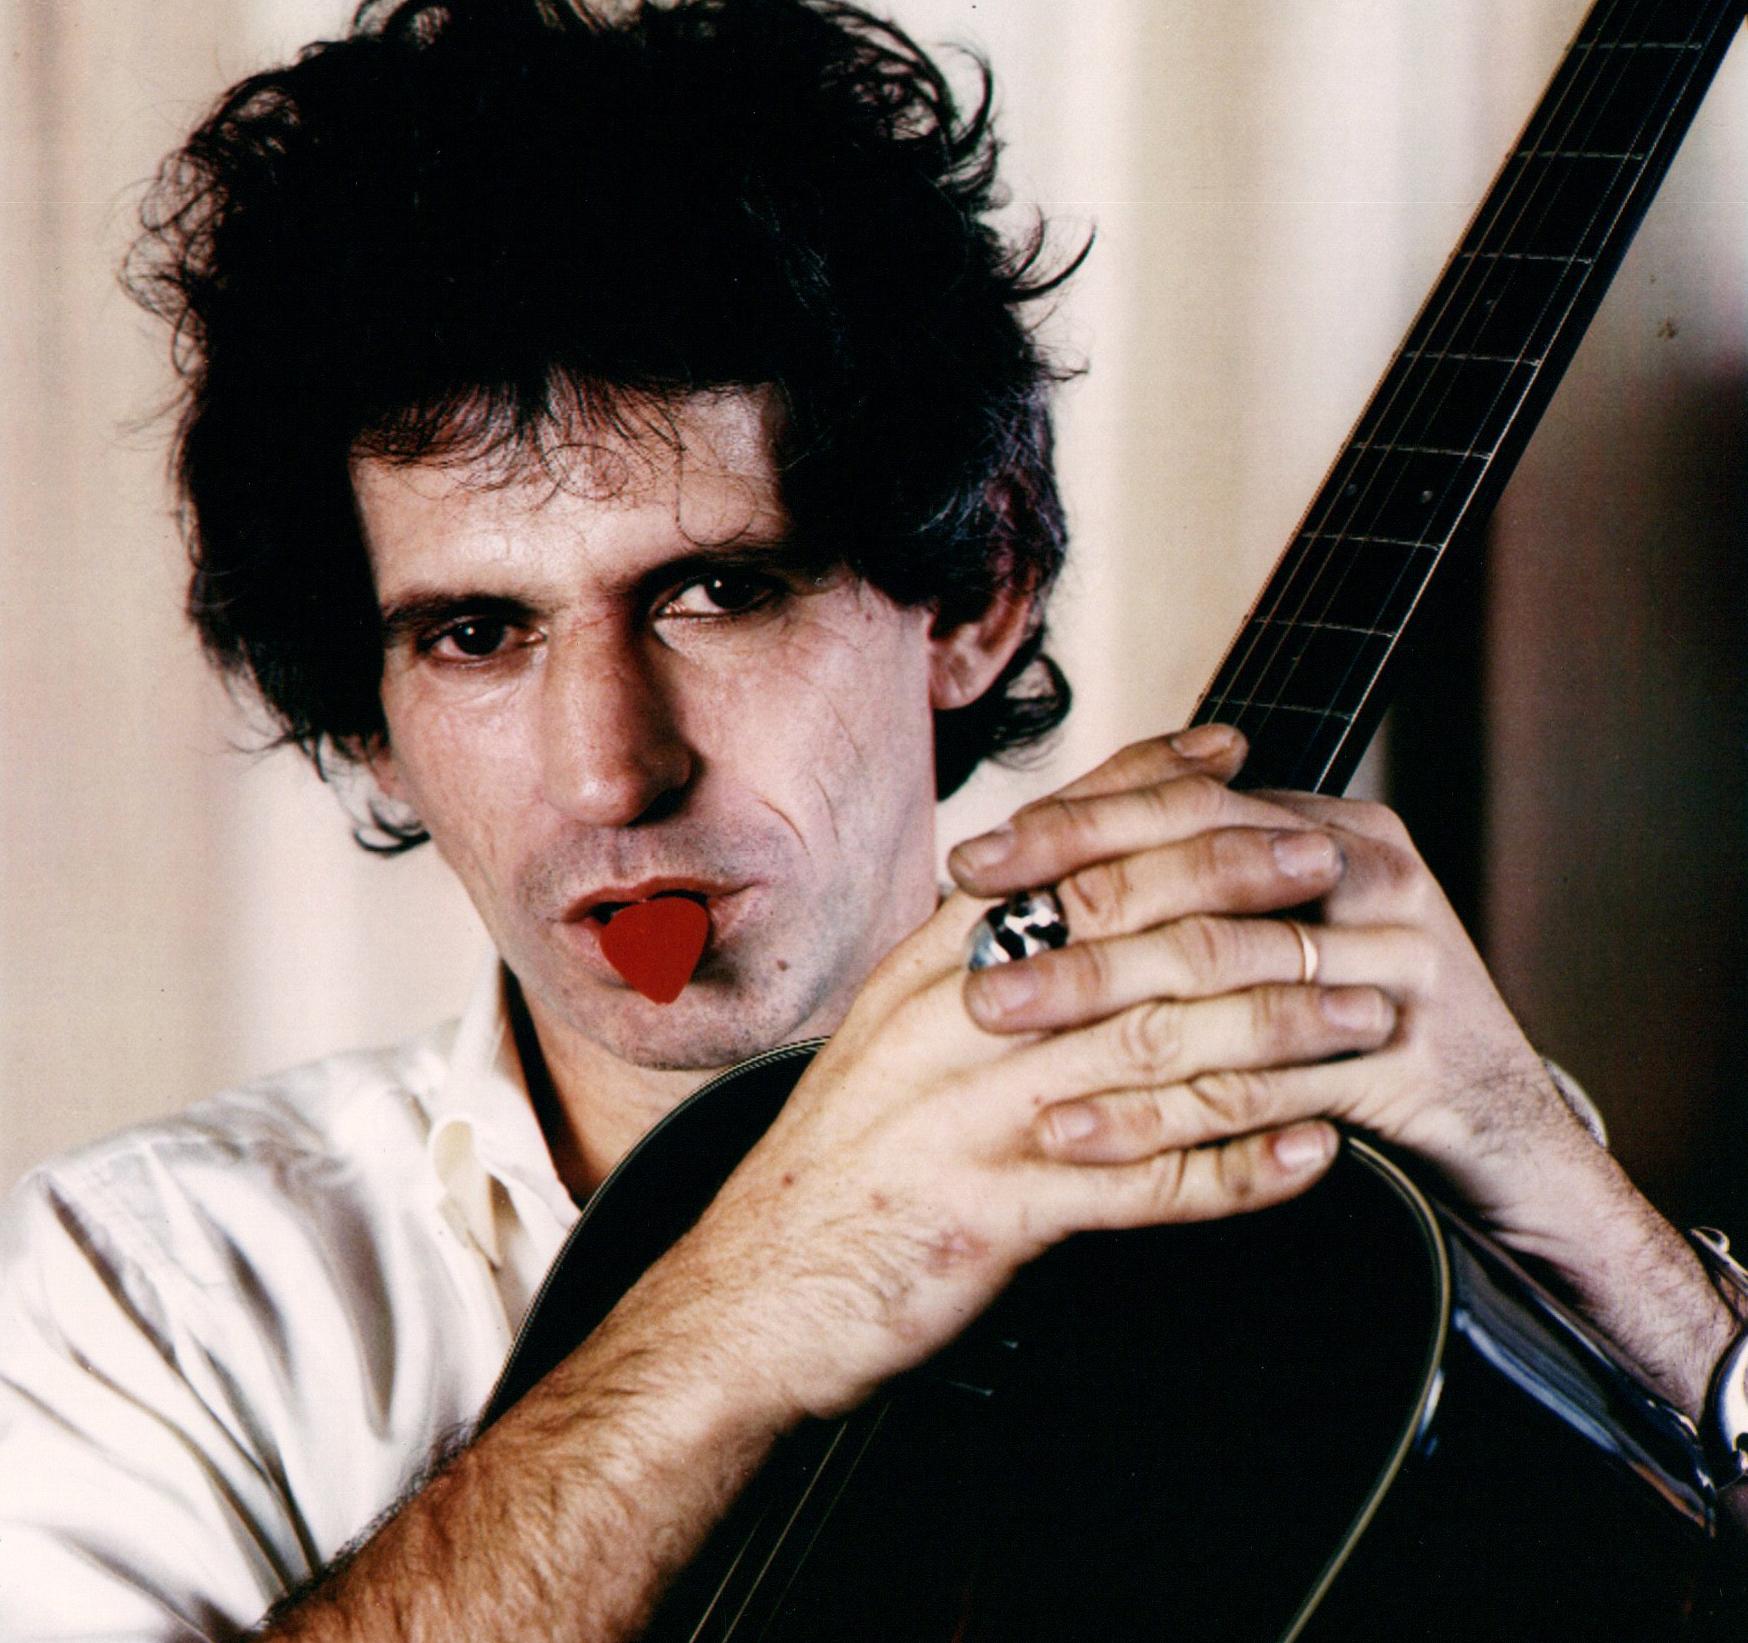 Luciano Viti Portrait Photograph - Keith Richards Posed with Guitar Pick in Mouth Vintage Original Photograph